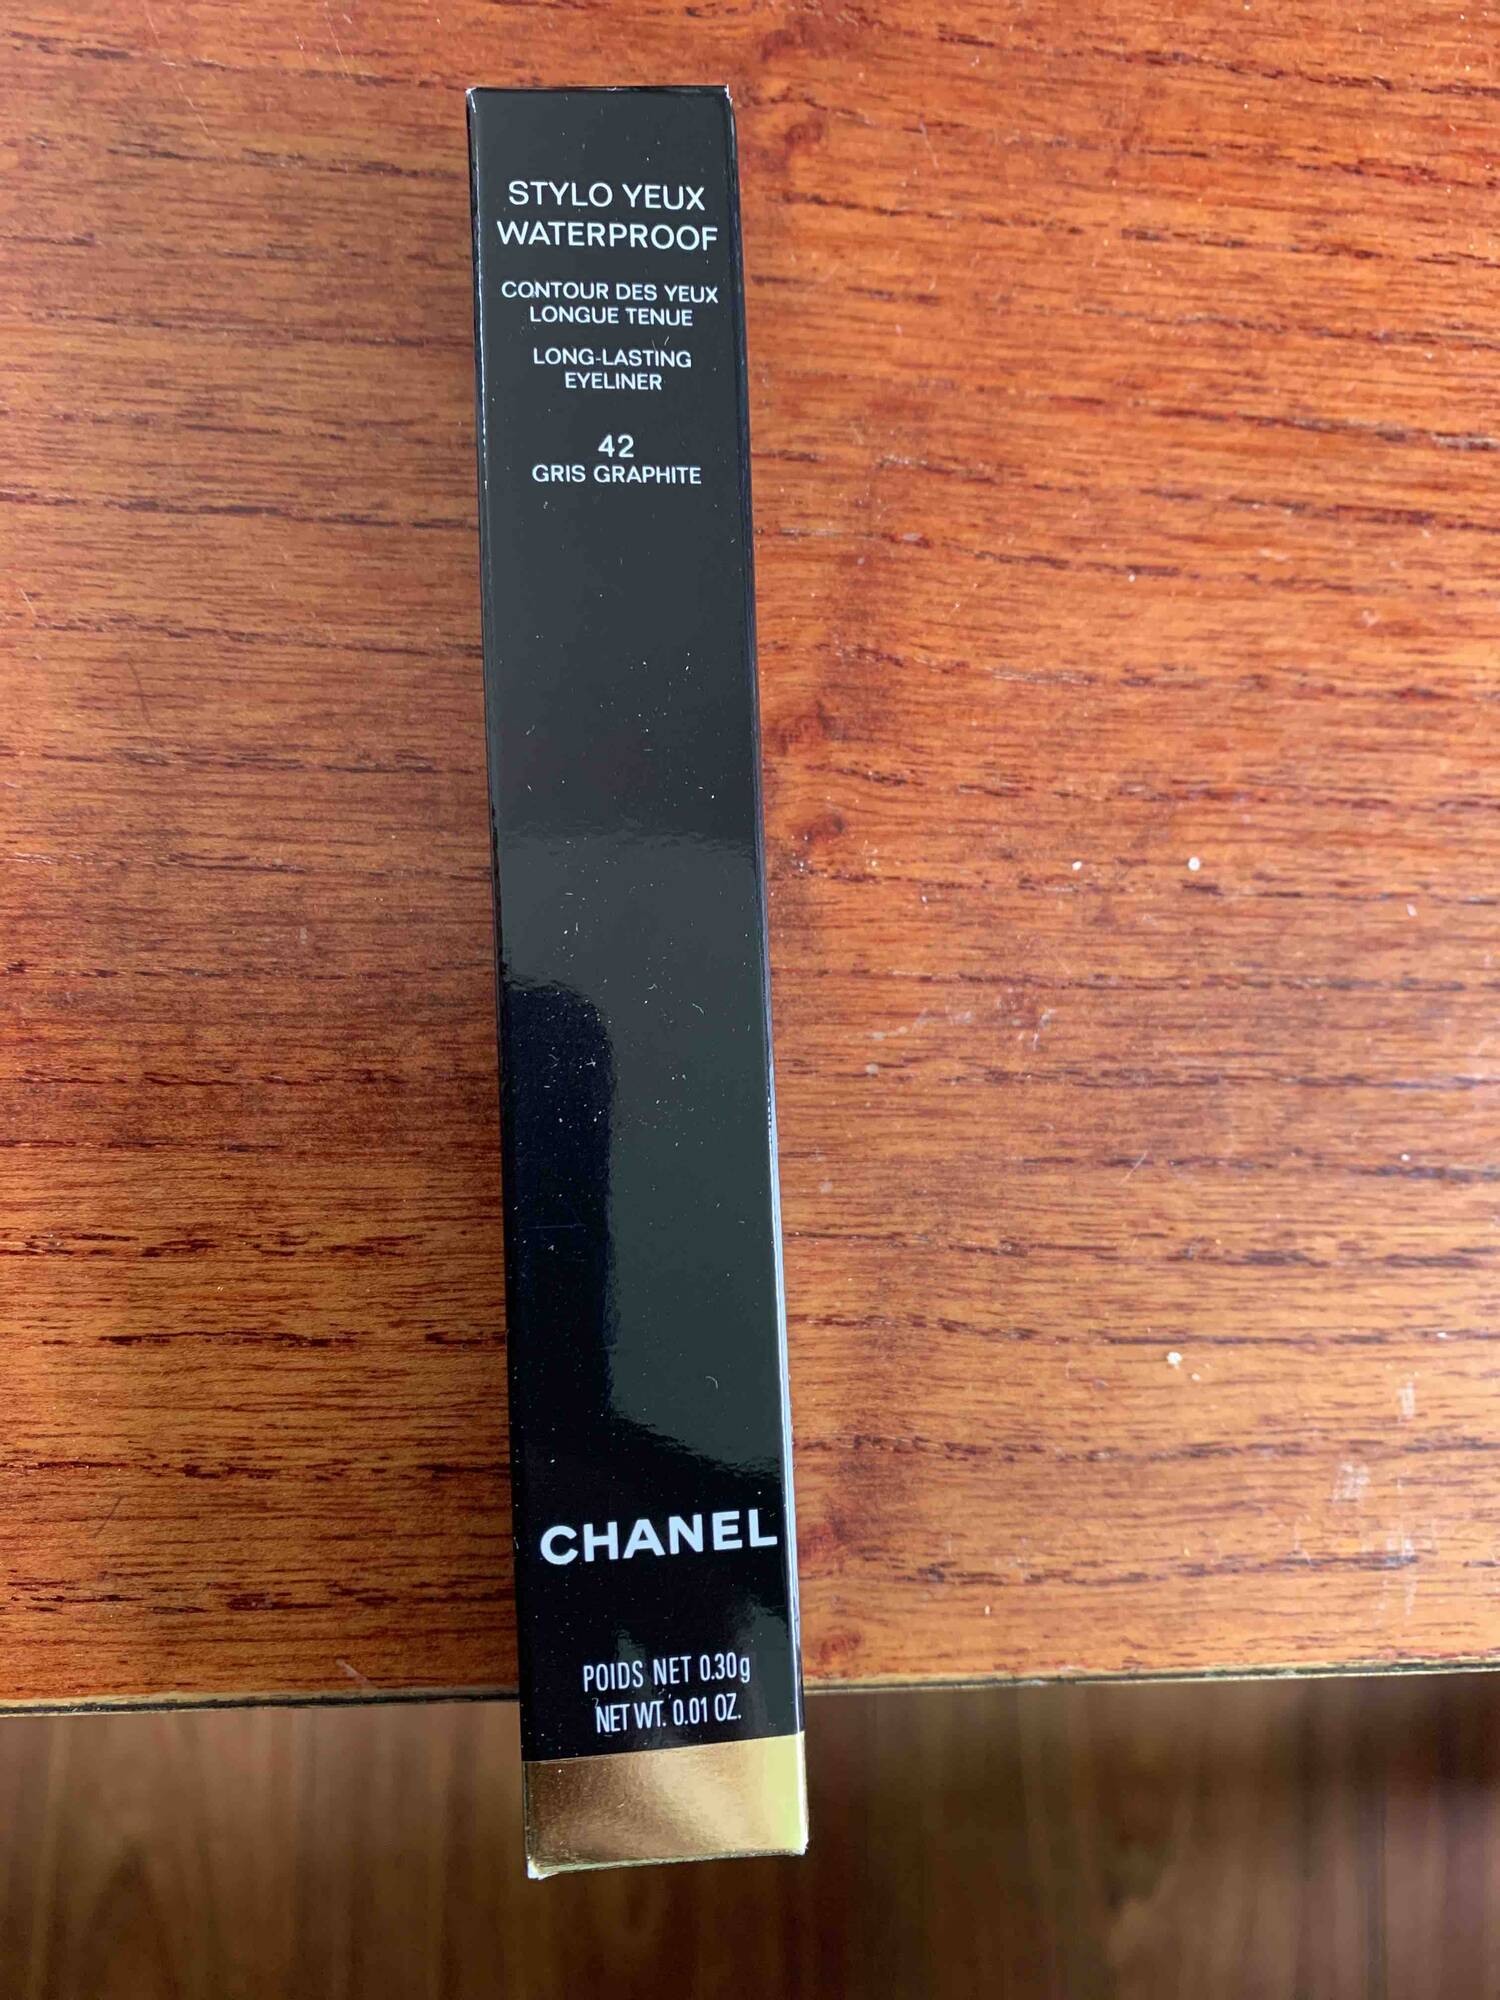 CHANEL - Stylo yeux waterproof 42 Gris graphite